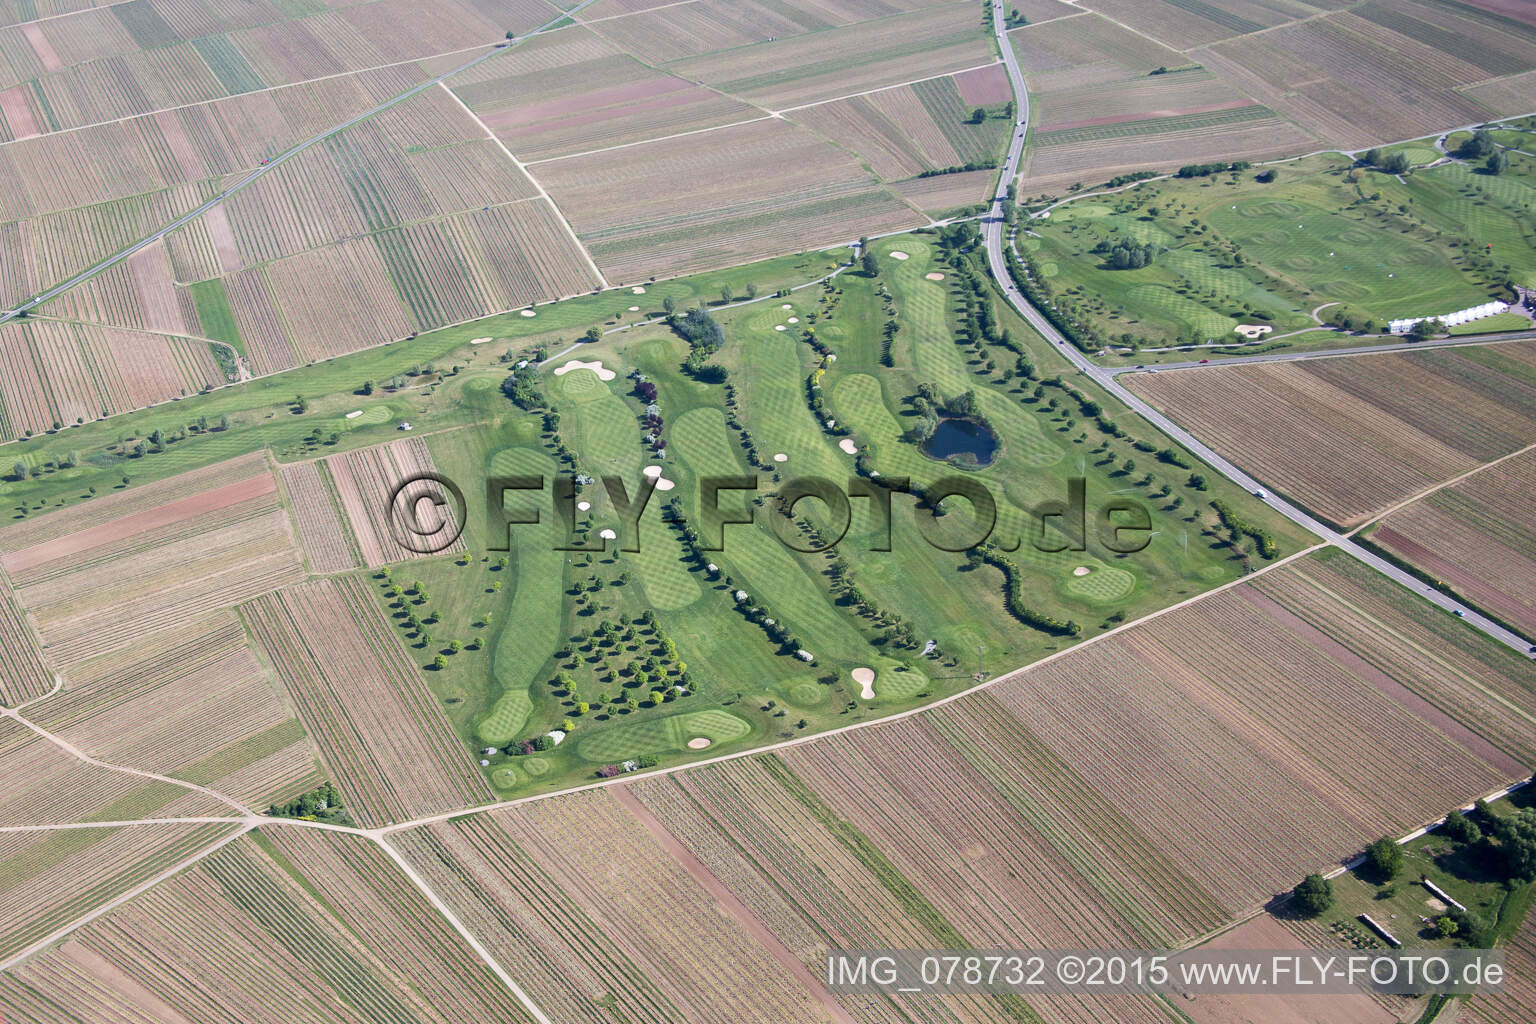 Golf course in Dackenheim in the state Rhineland-Palatinate, Germany from above